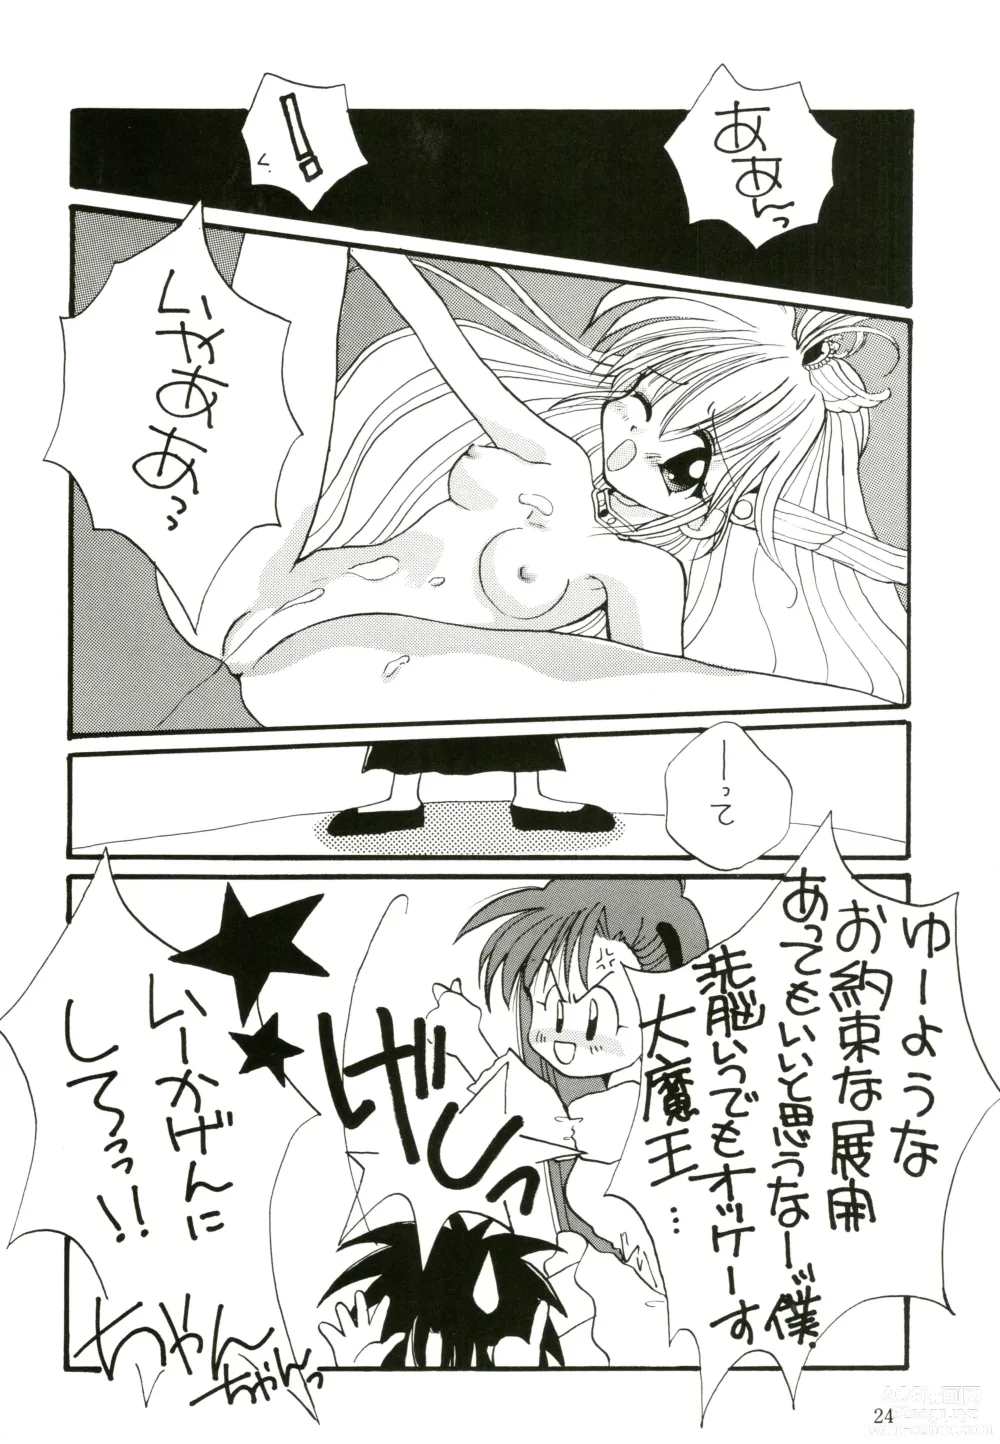 Page 26 of doujinshi PROMINENT 4